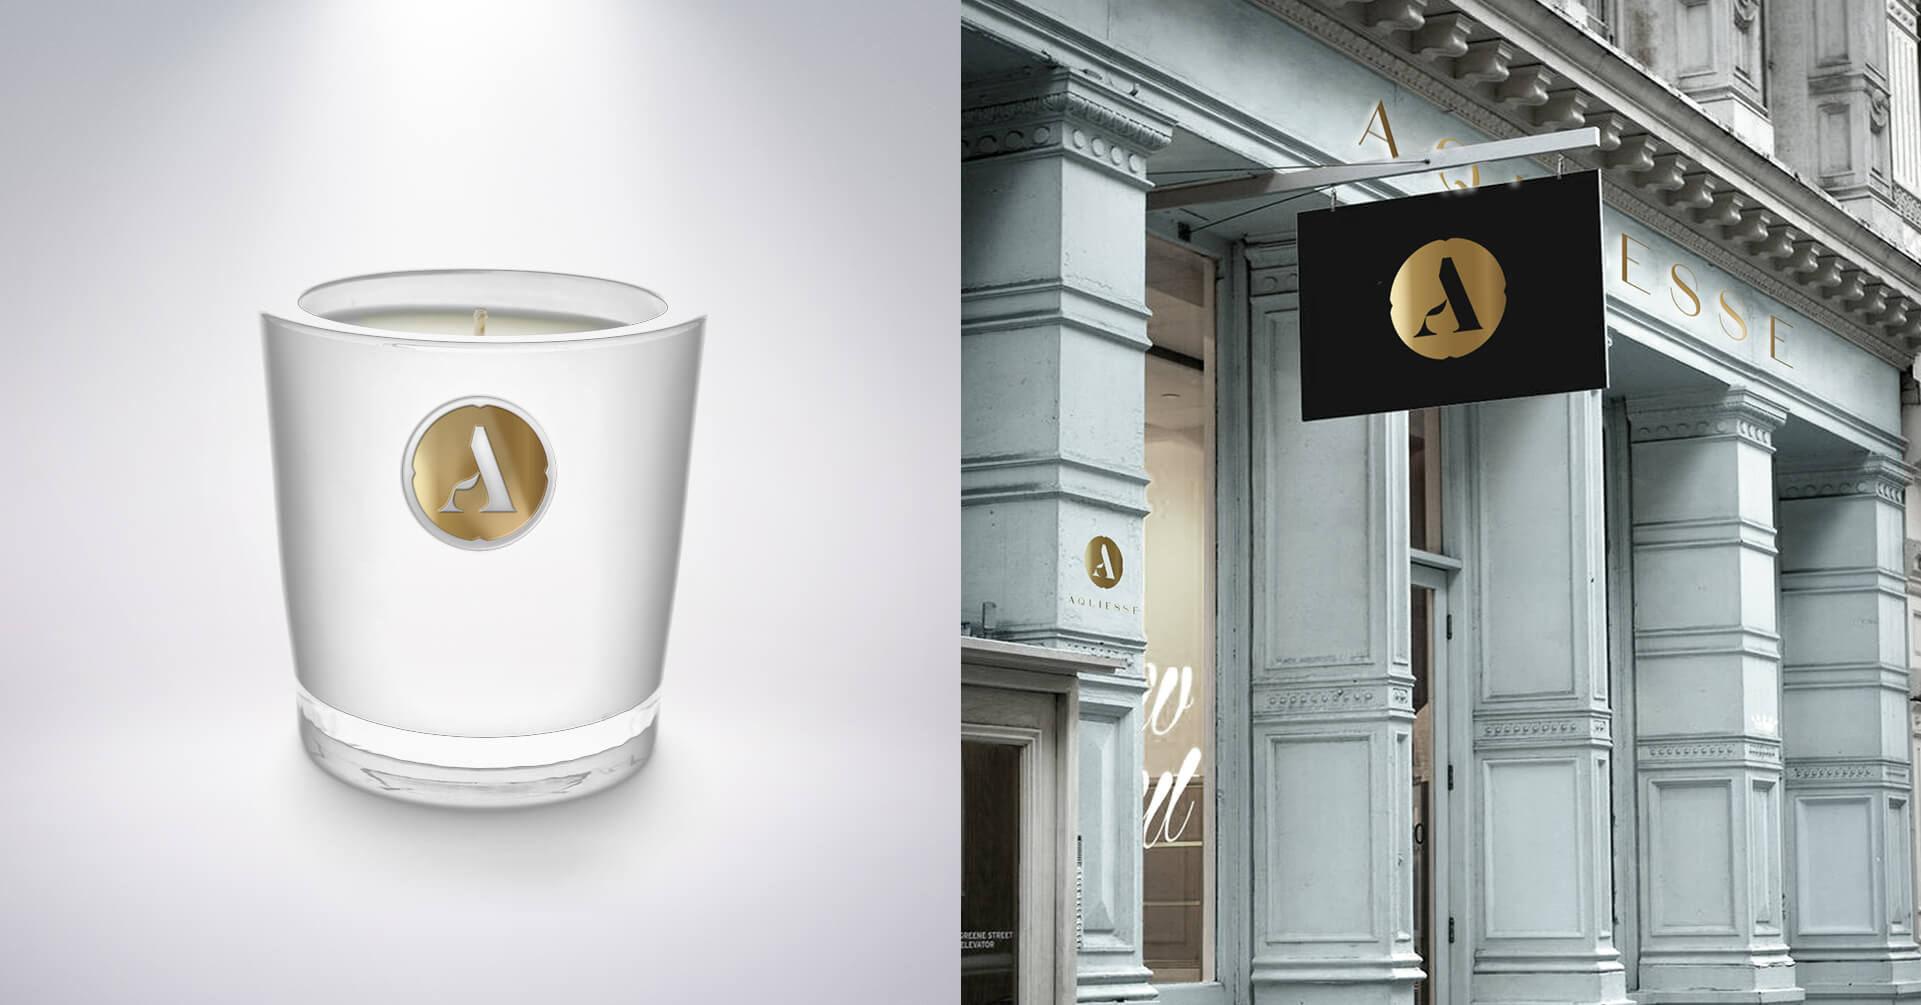 Candle packaging and retail store exterior branding